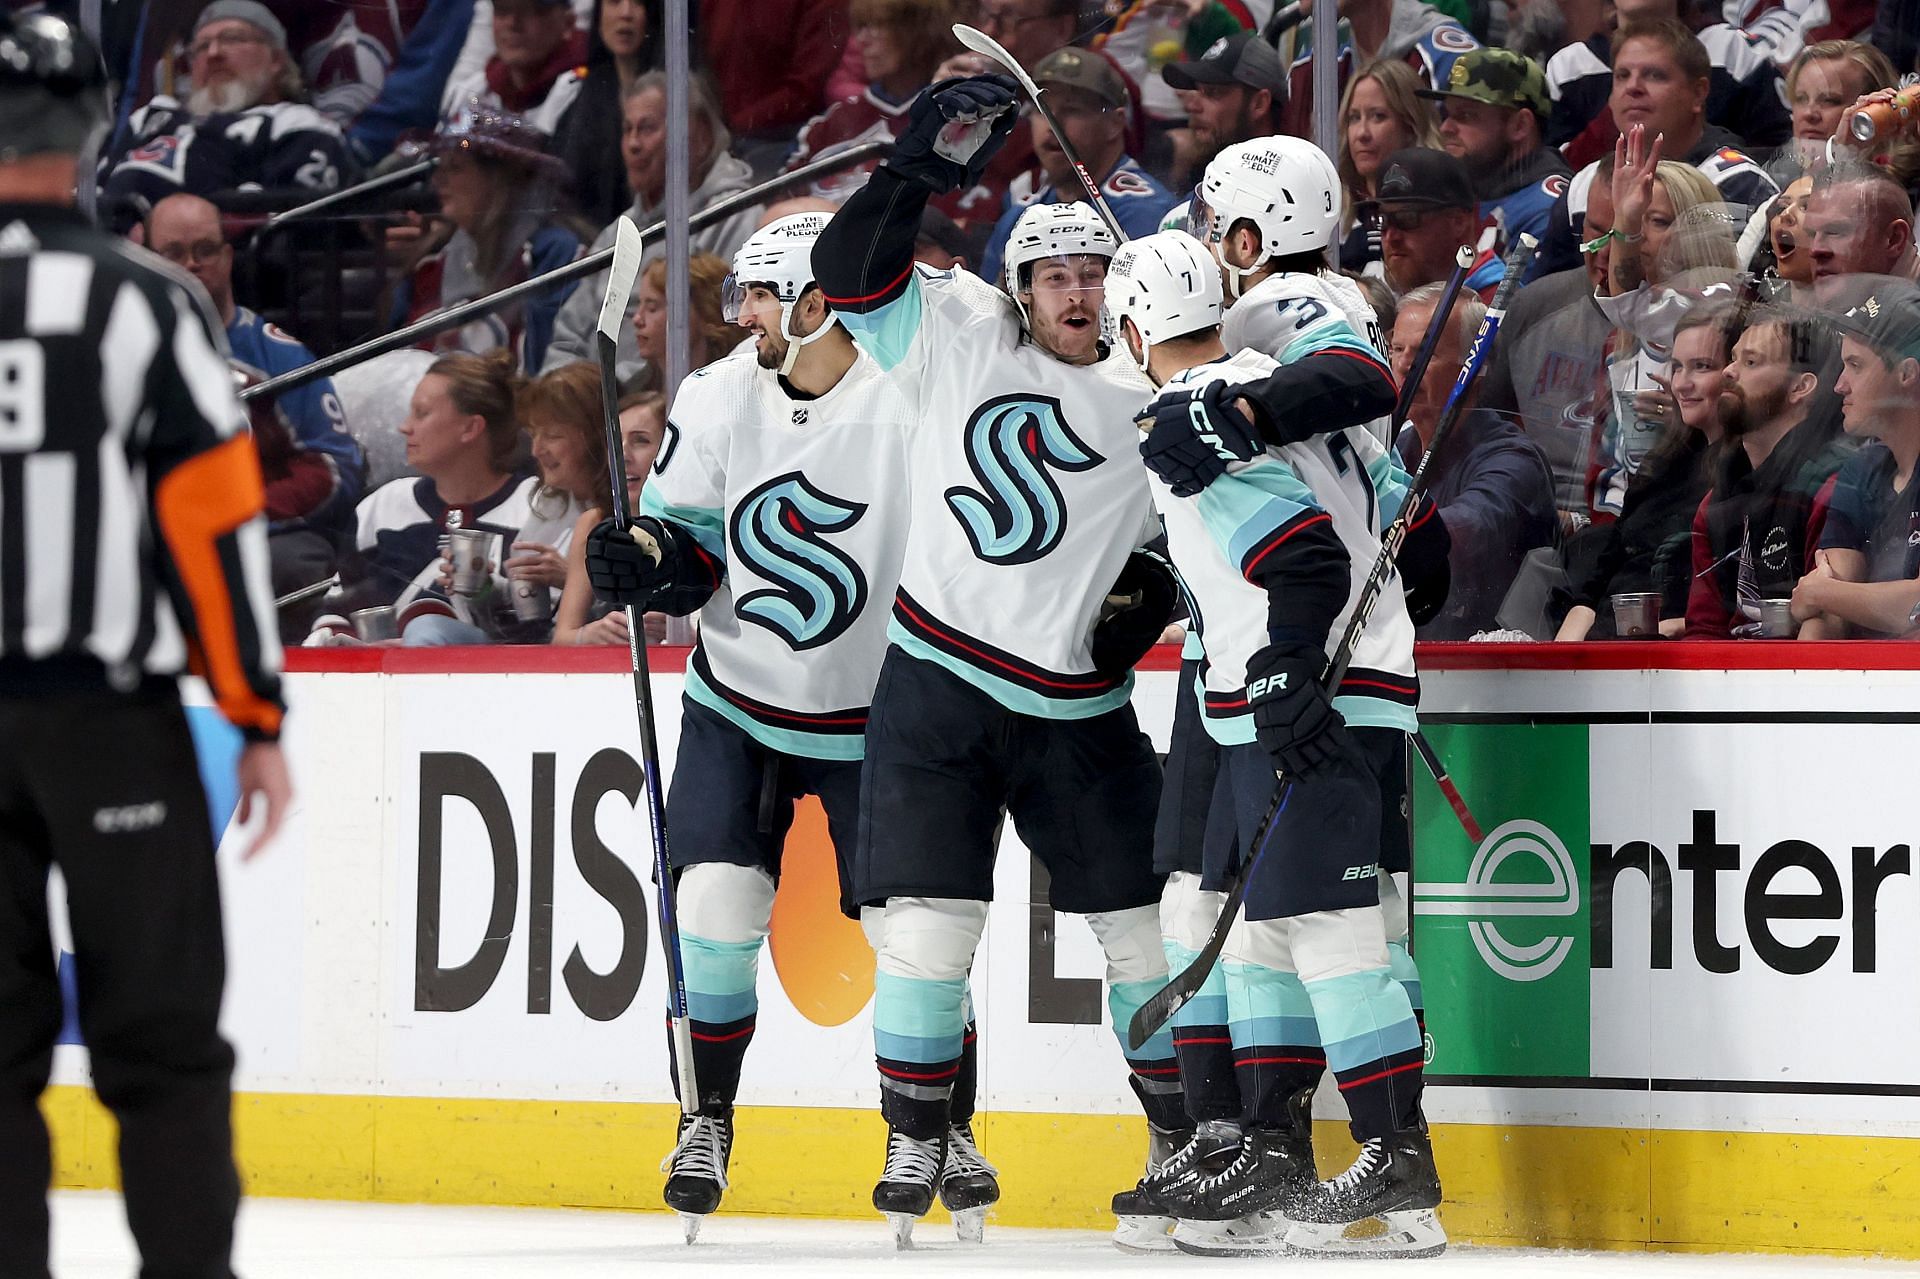 Tye Kartye #52 of the Seattle Kraken celebrates with Matty Beniers #10, Will Borgen #3, and Jordan Eberle 7 after scoring against the Colorado Avalanche in the second period during Game Five of the First Round of the 2023 Stanley Cup Playoffs at Ball Arena on April 26, 2023 in Denver, Colorado. (Photo by Matthew Stockman/Getty Images)